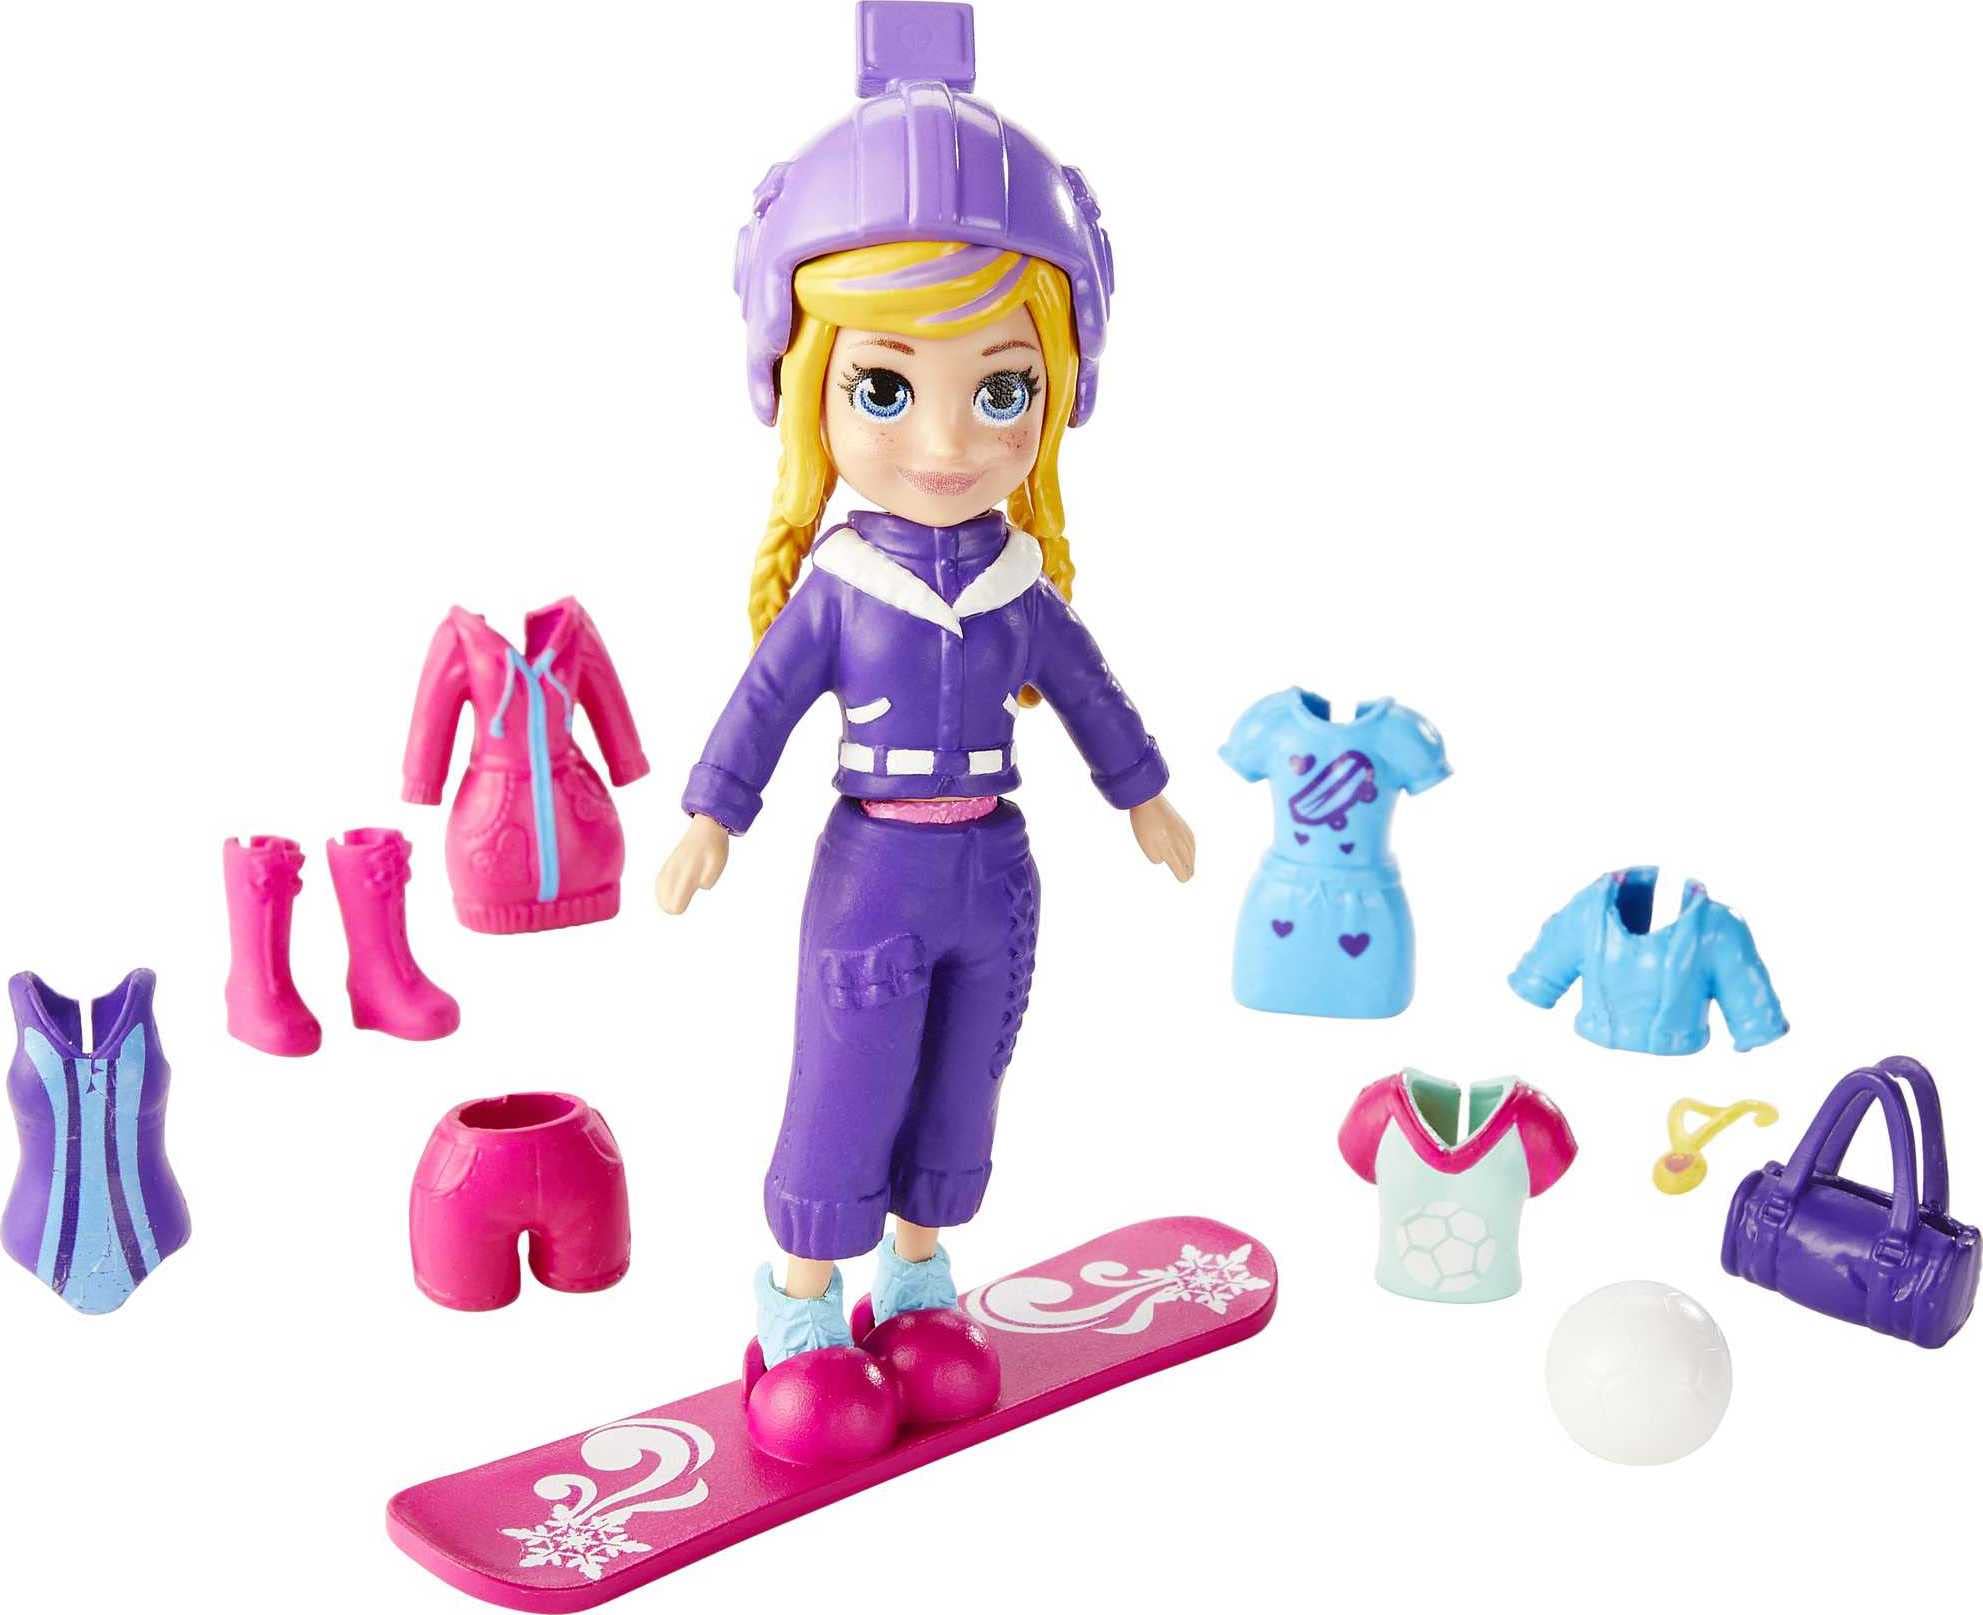 Polly Pocket Travel Toy Playset with Four (3-Inch) Dolls and 40+ Fashion Accessories, Themed Characters Fashion Pack (Amazon Exclusive)